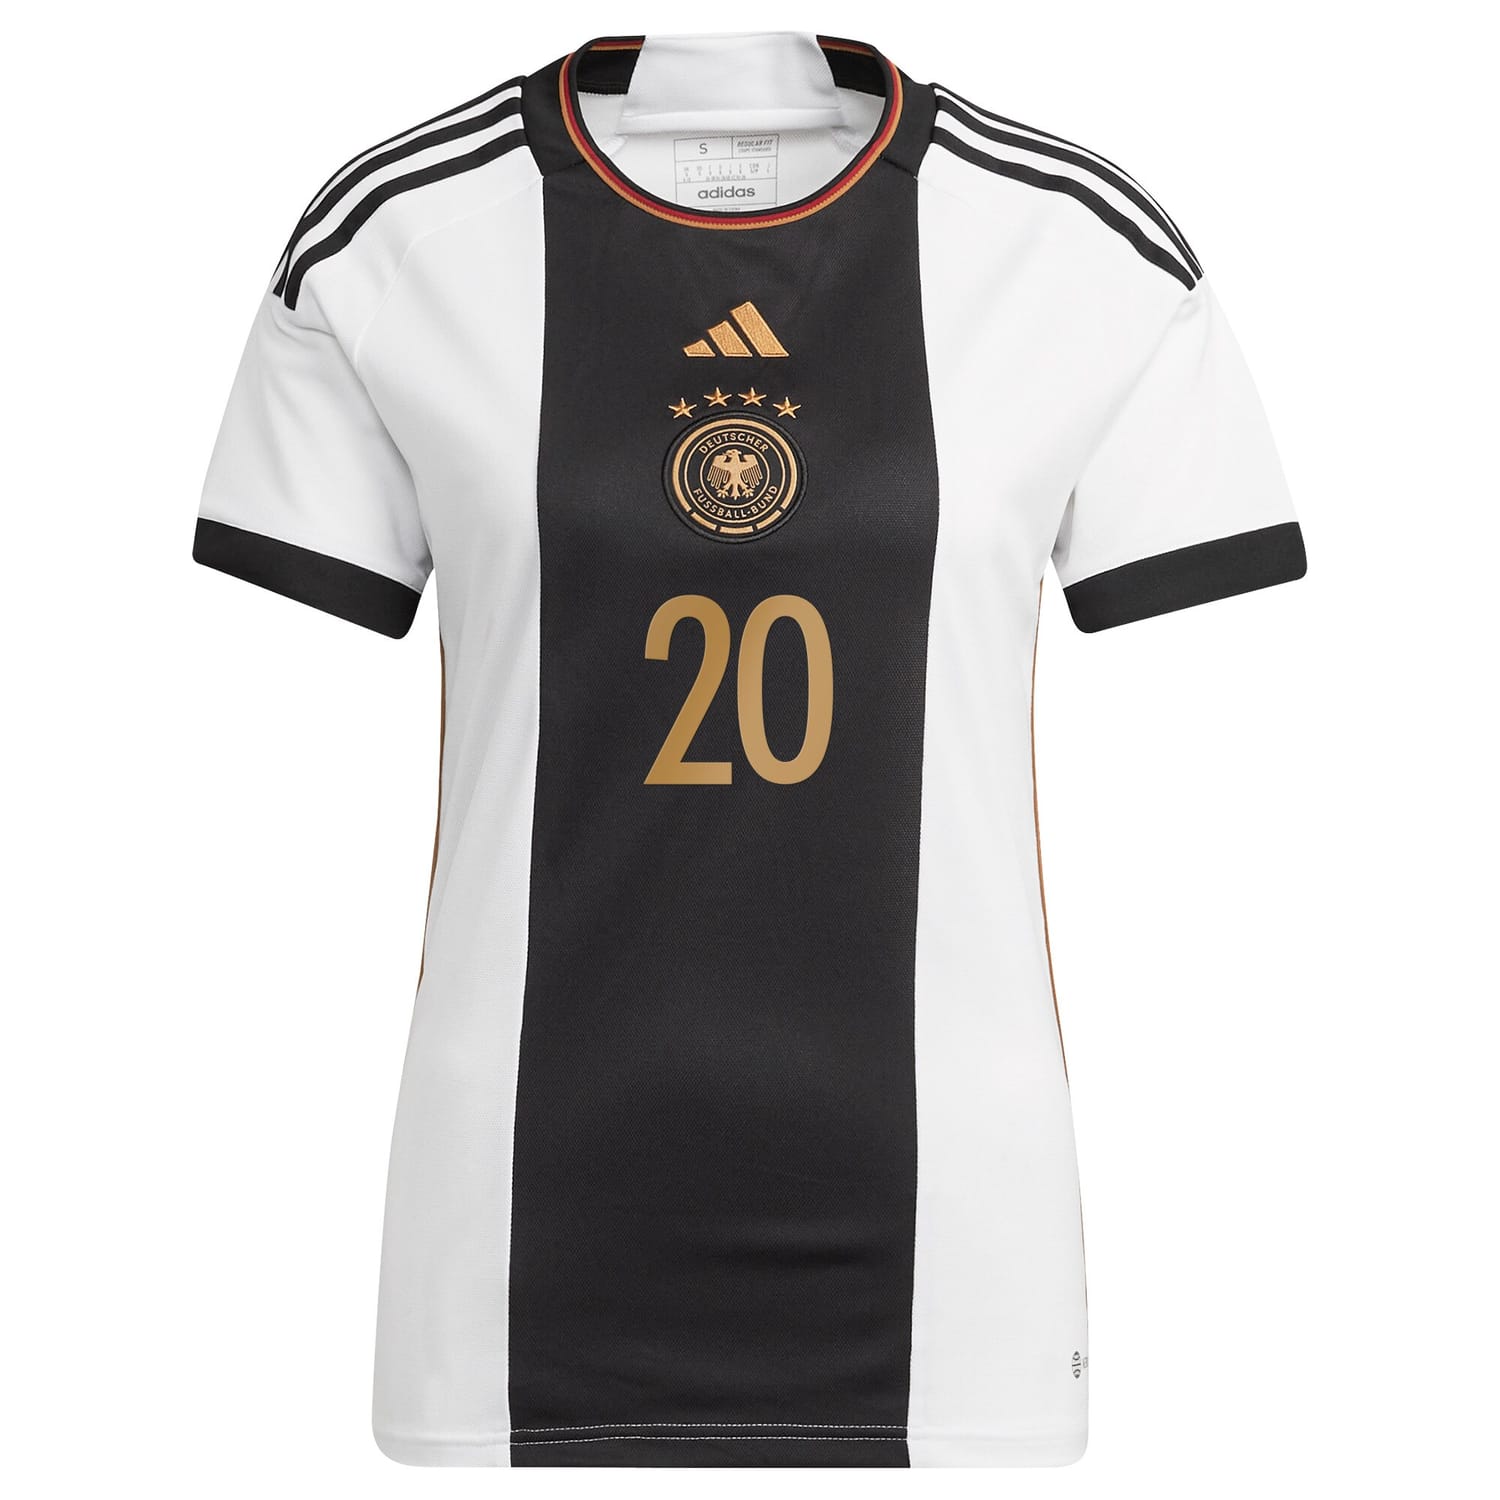 Germany National Team Home Jersey Shirt 2022 player Christian Günter 20 printing for Women